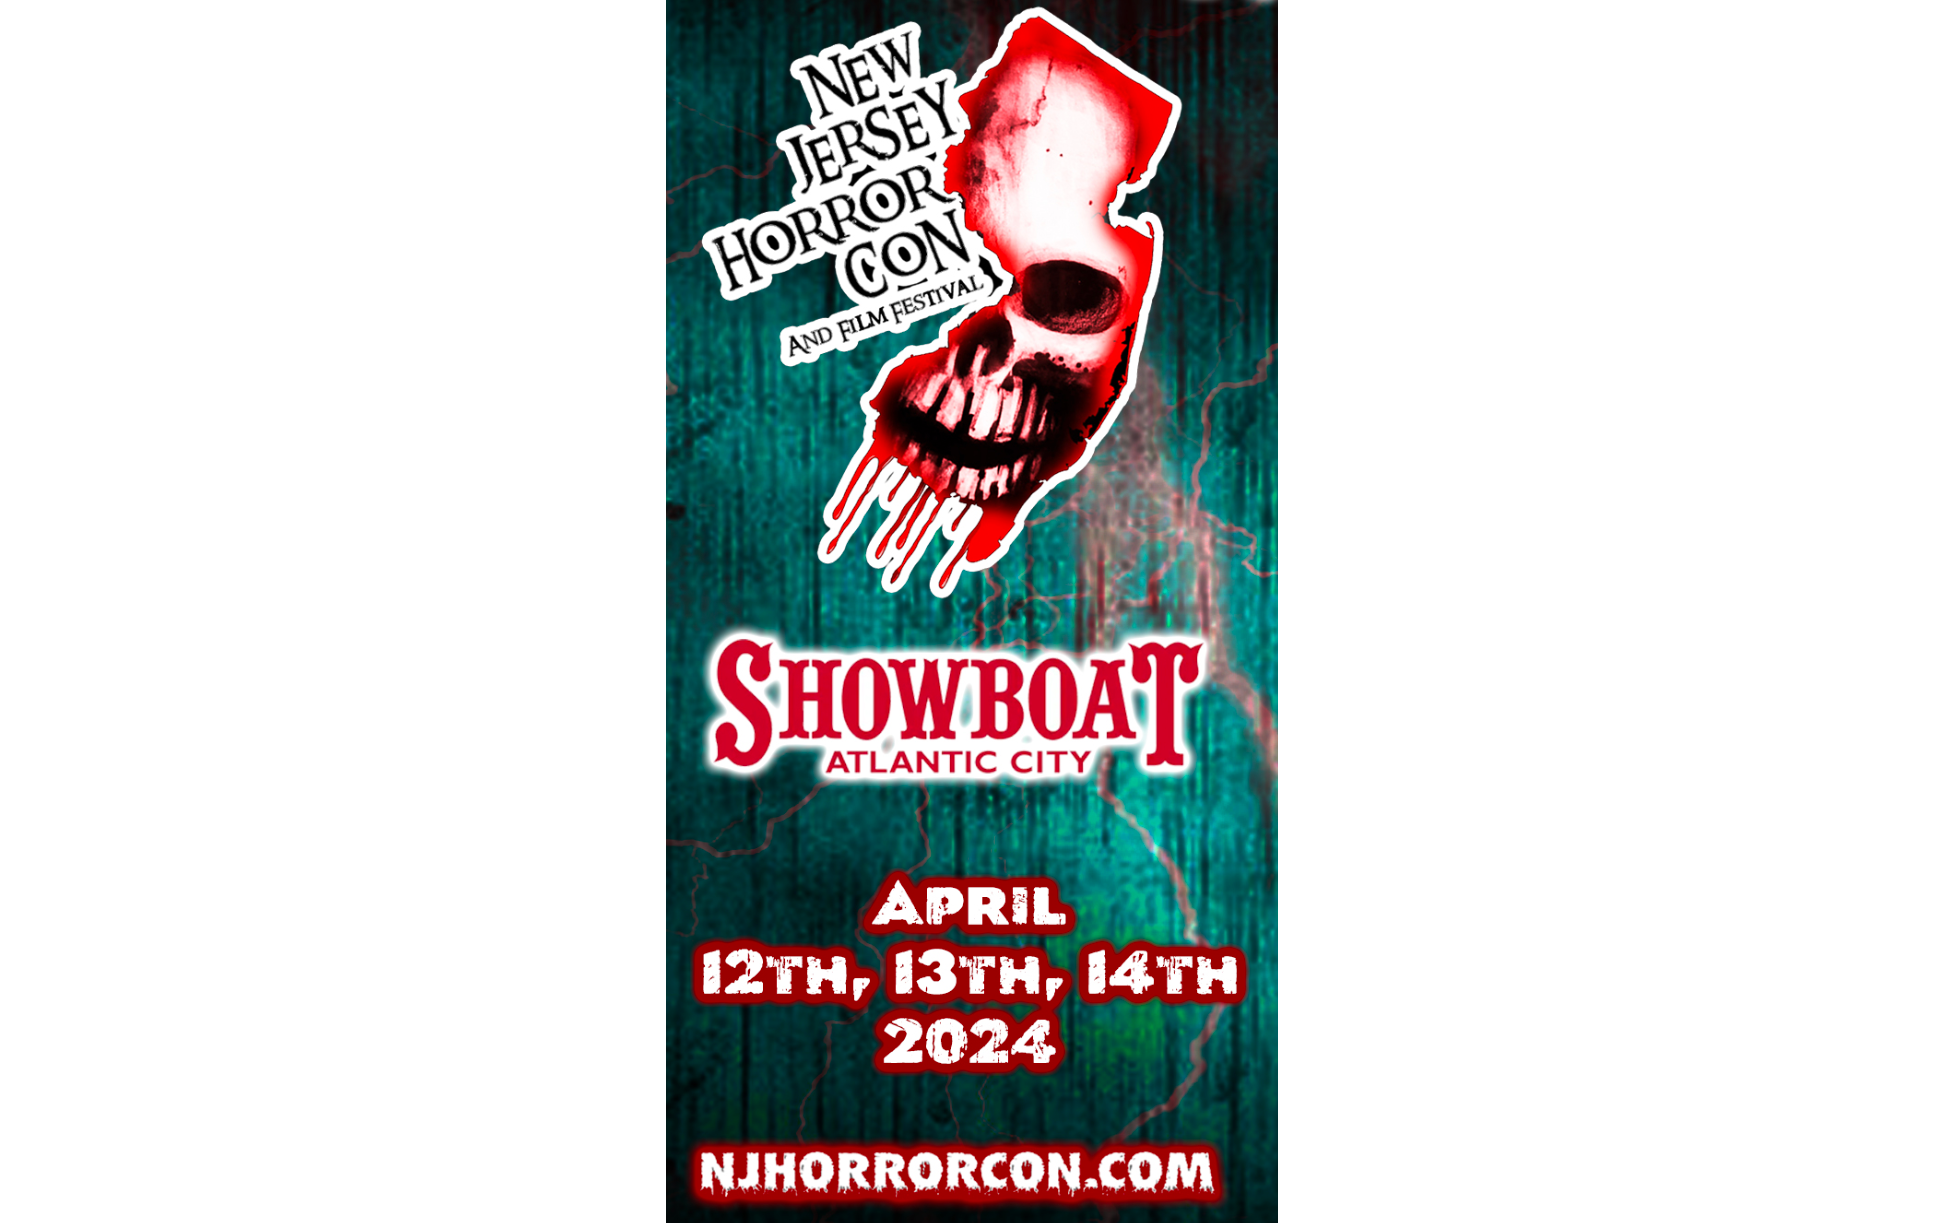 TICKETS NJ Horror Con and Film Festival April 19th, 20th and 21st, 2024